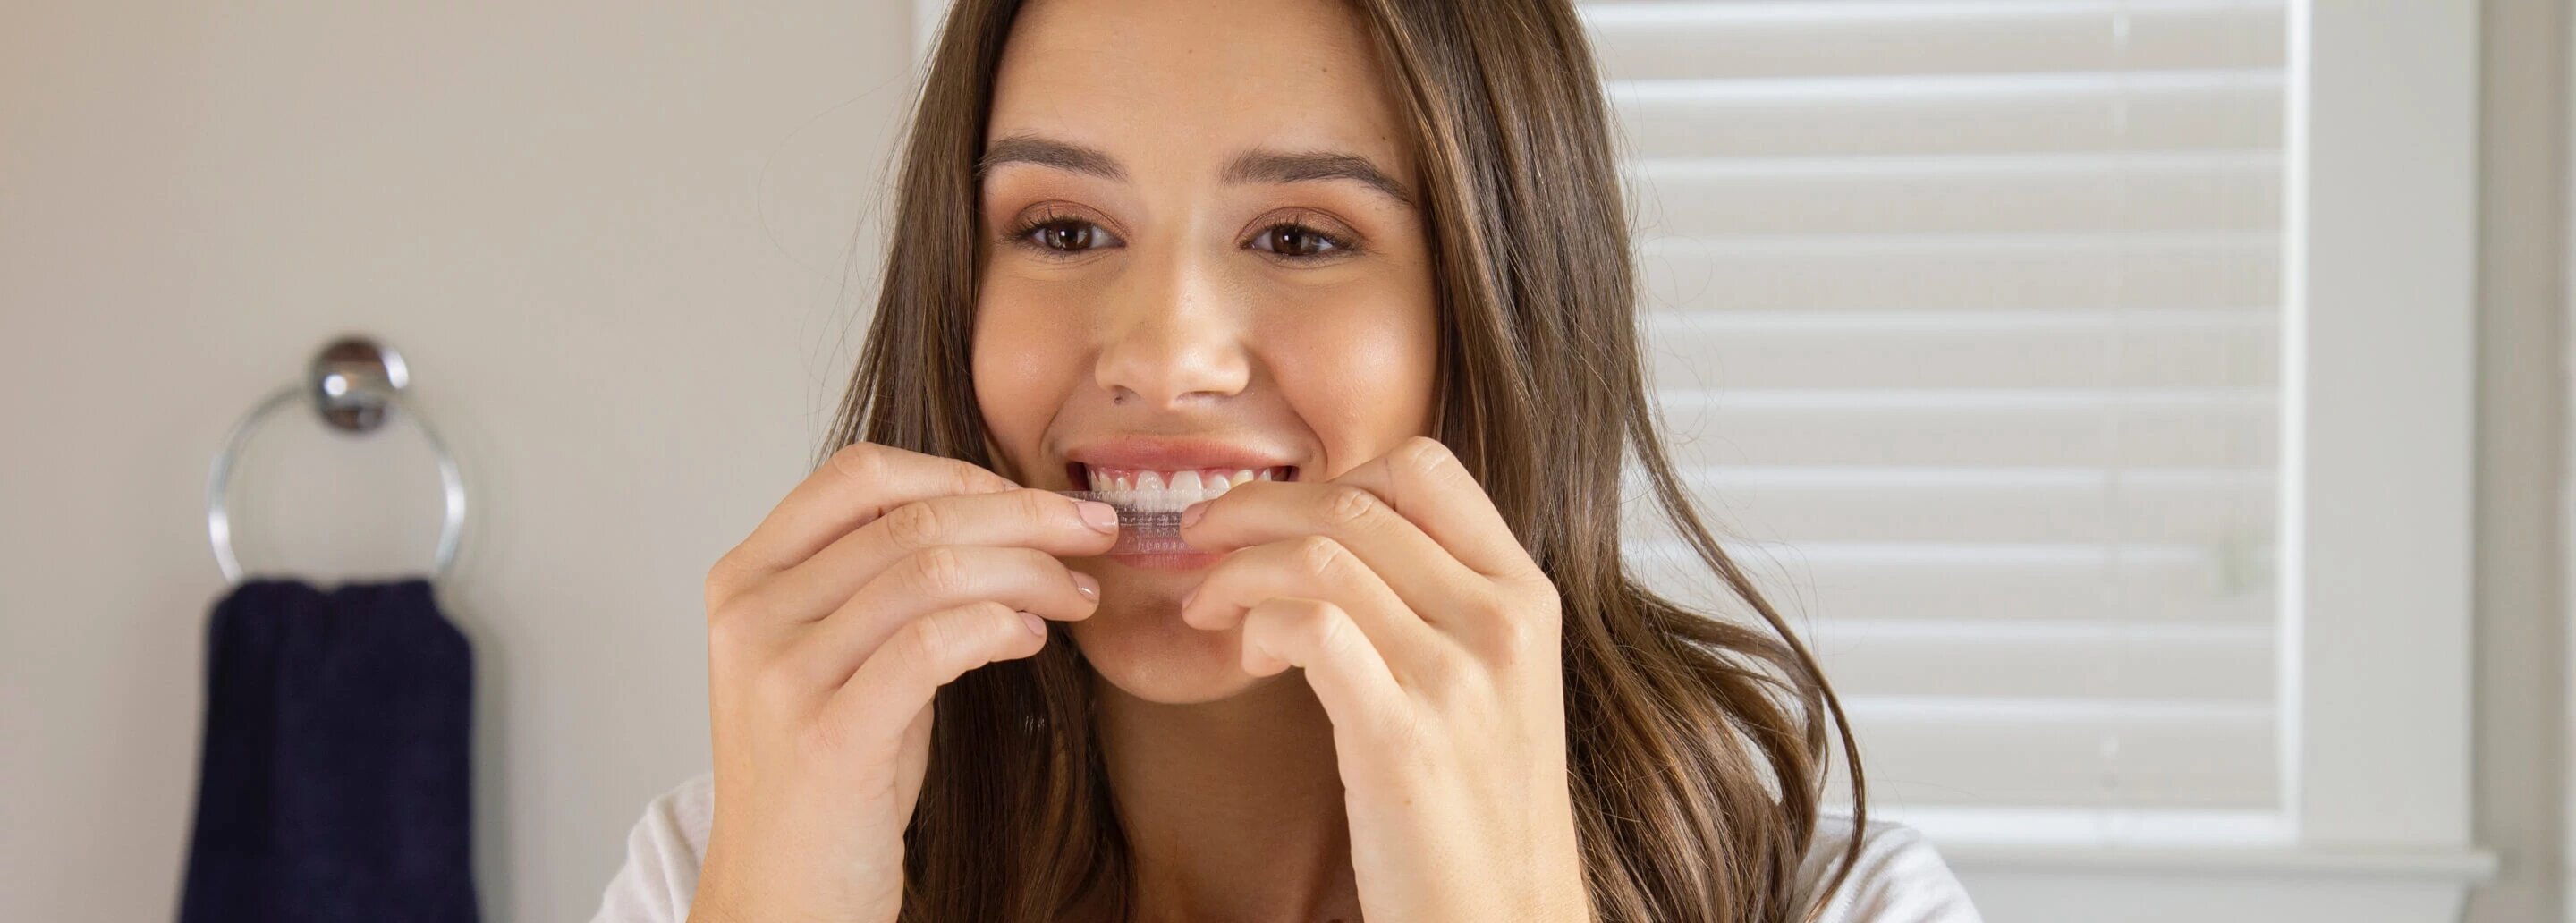 Young brunette woman smiles as she applies Crest 3DWhitestrips to her teeth.